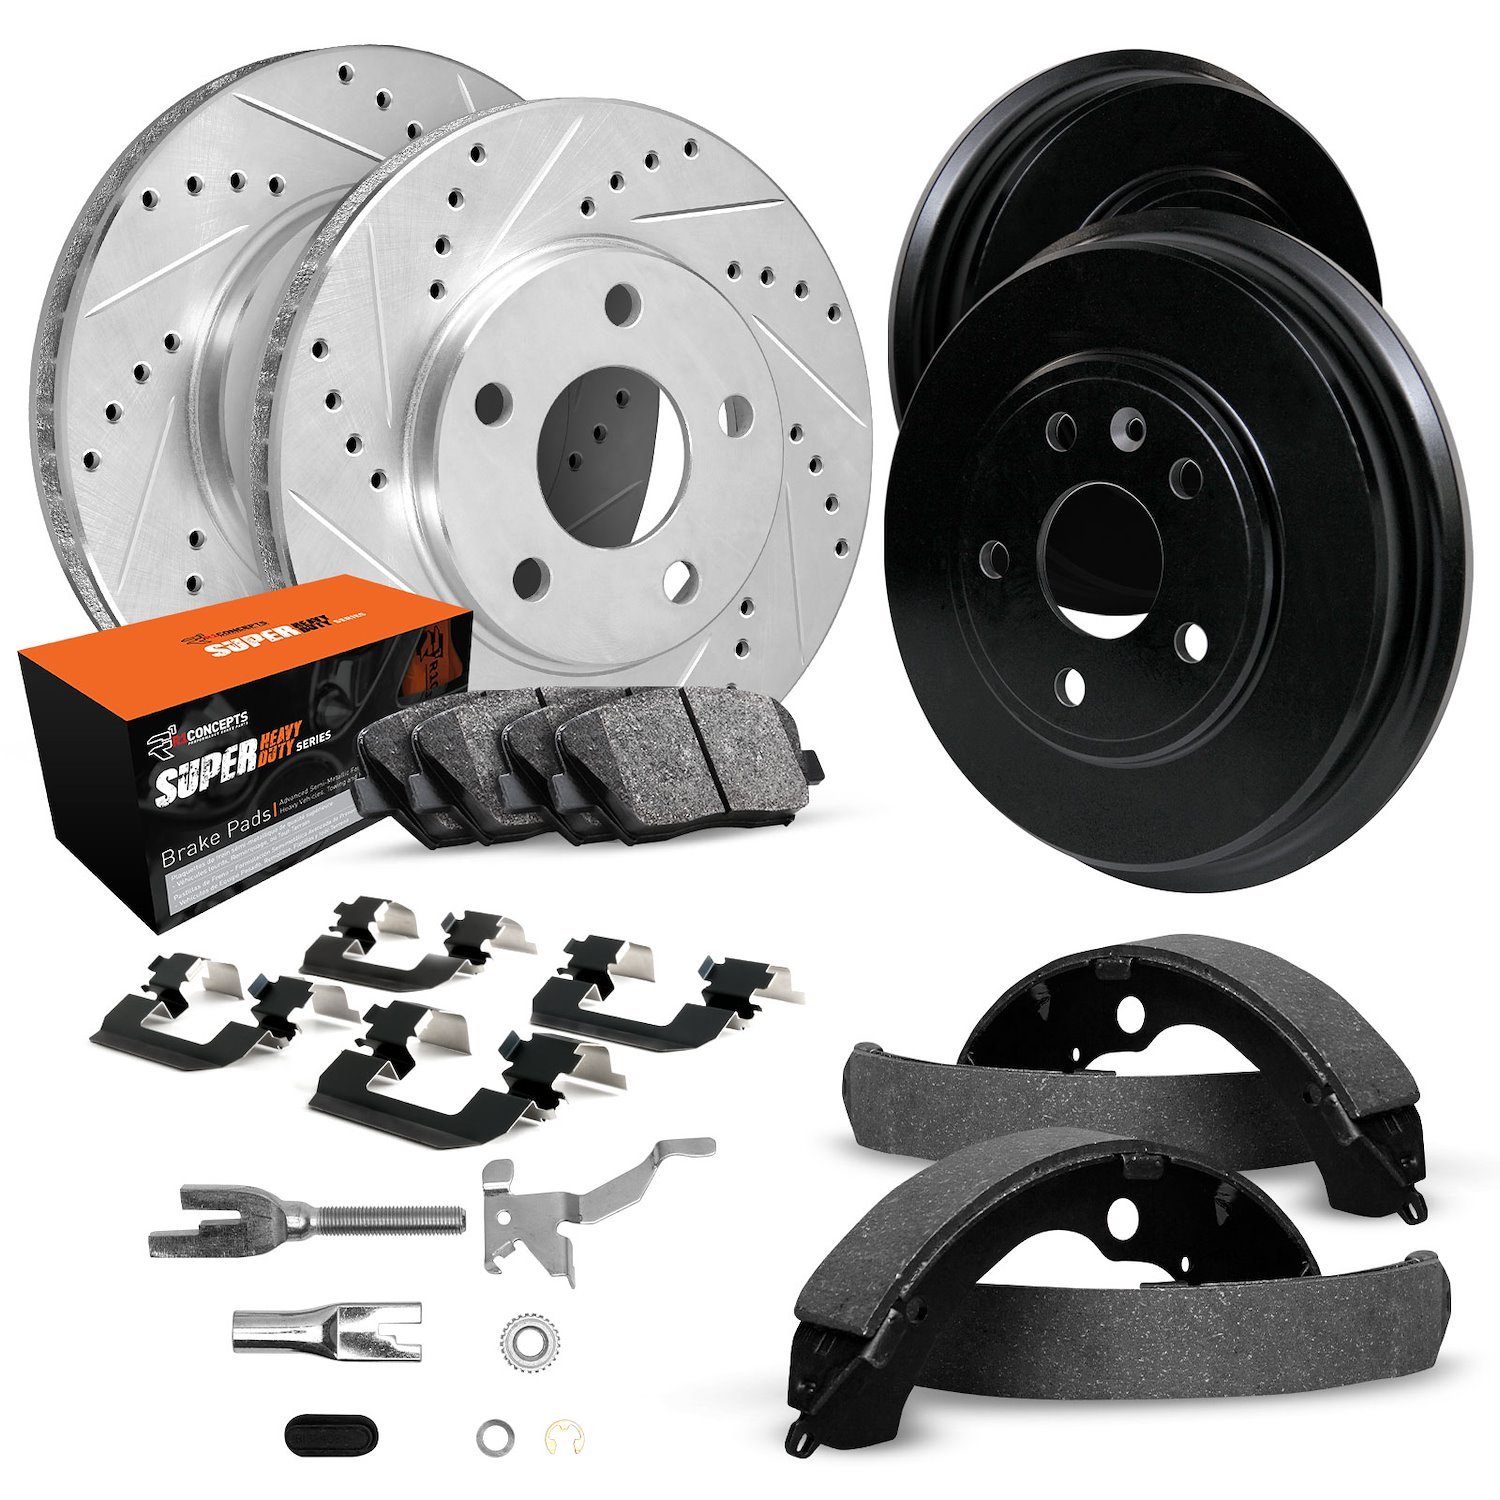 E-Line Drilled/Slotted Silver Rotor & Drum Set w/Super-Duty Pads, Shoes/Hardware/Adjusters, 1991-1992 Mopar